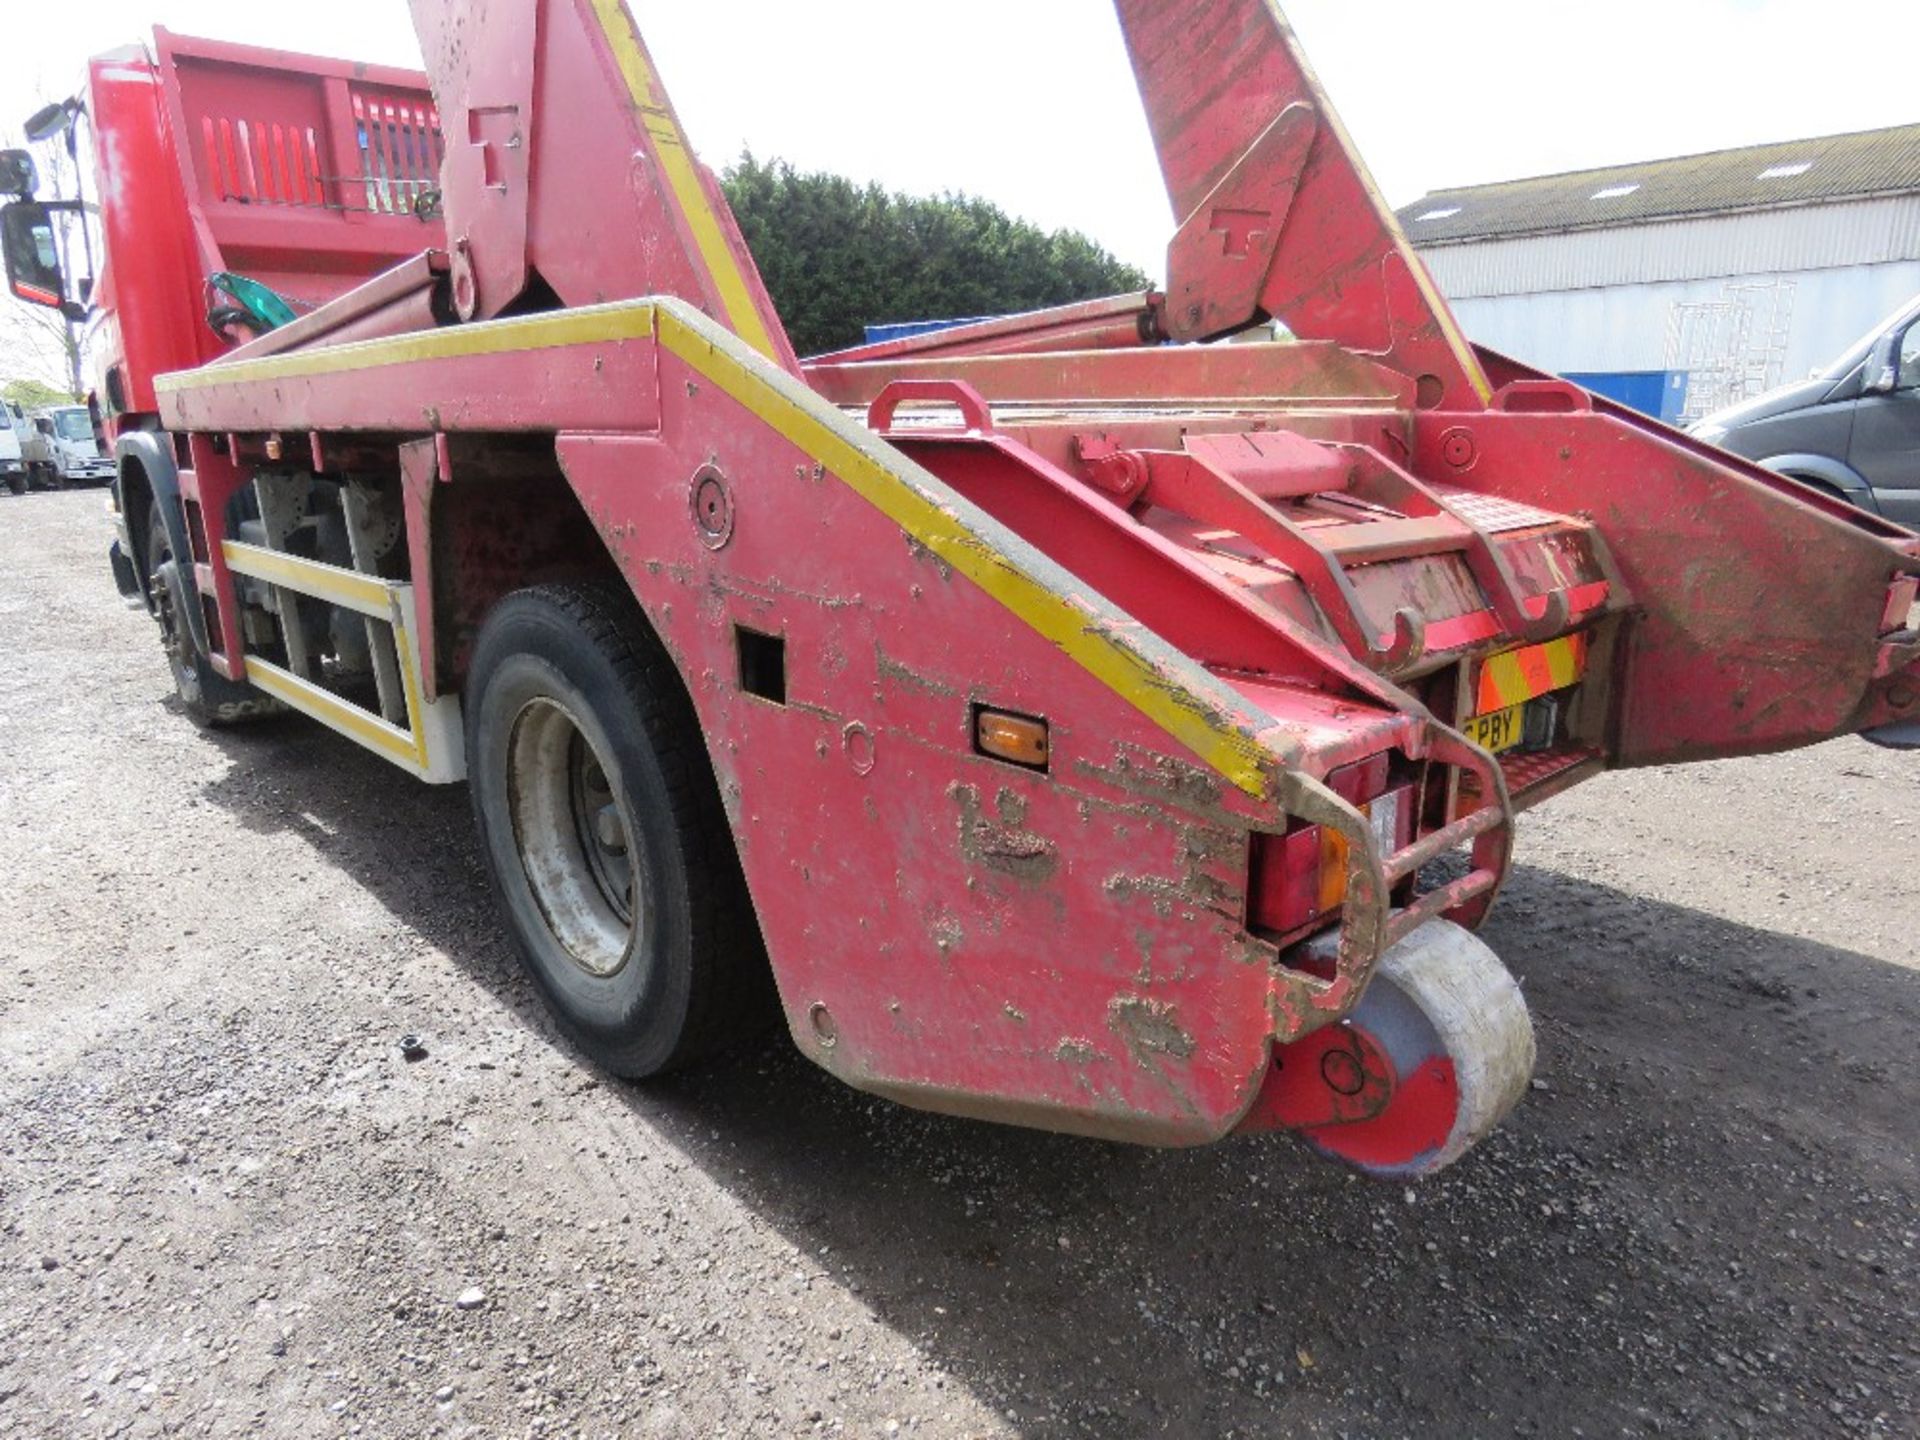 SCANIA P230 4X2 CHAIN LIFT SKIP LORRY YEAR 2006. MANUAL GEARBOX. 18 TONNE RATED, - Image 8 of 18